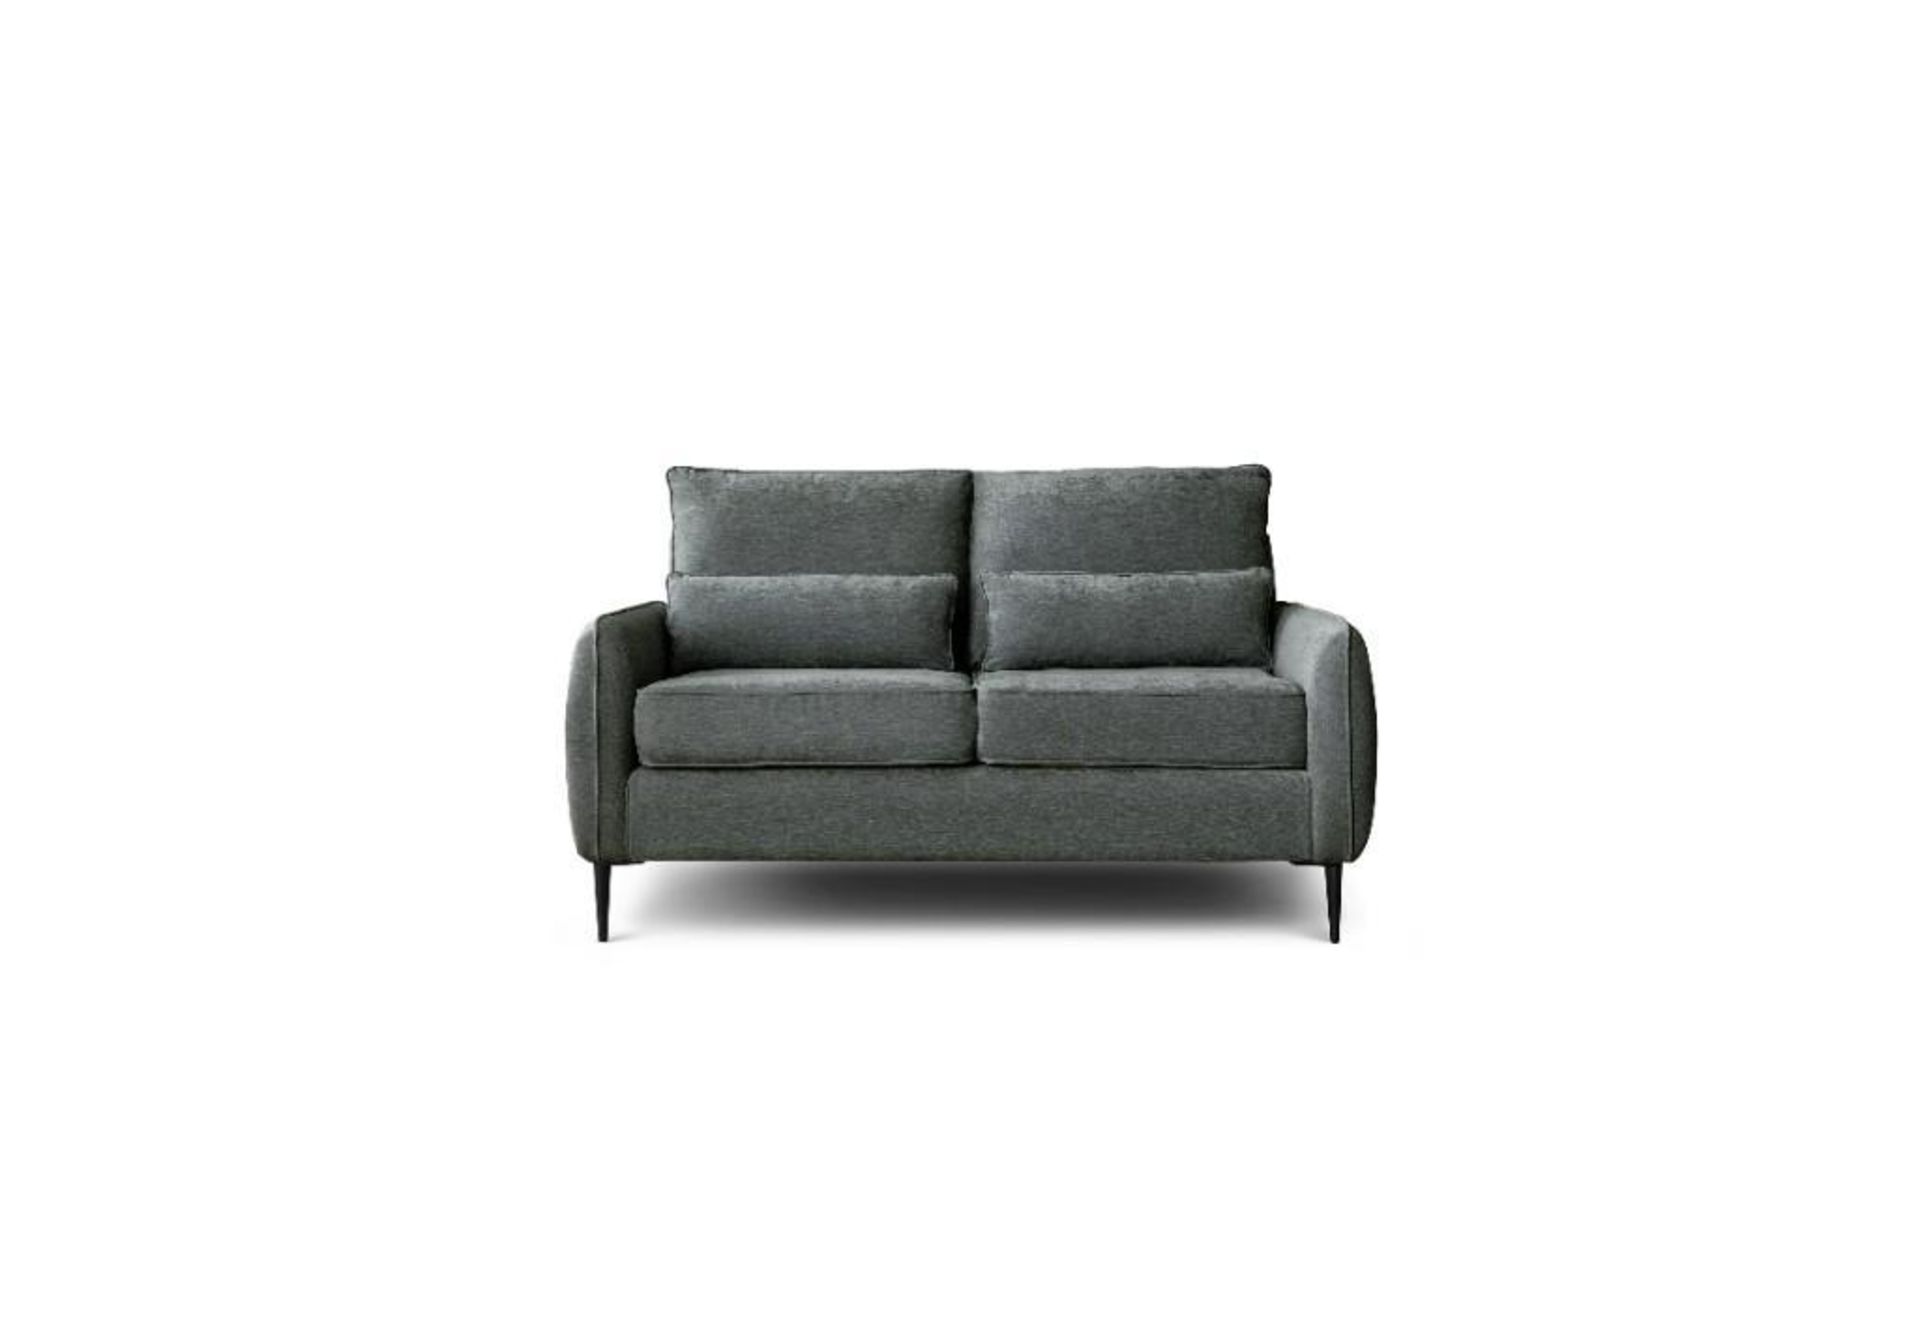 1 X Brand new Boxed 2 Seater Rhonda Sofa in Charcoal - Image 3 of 3